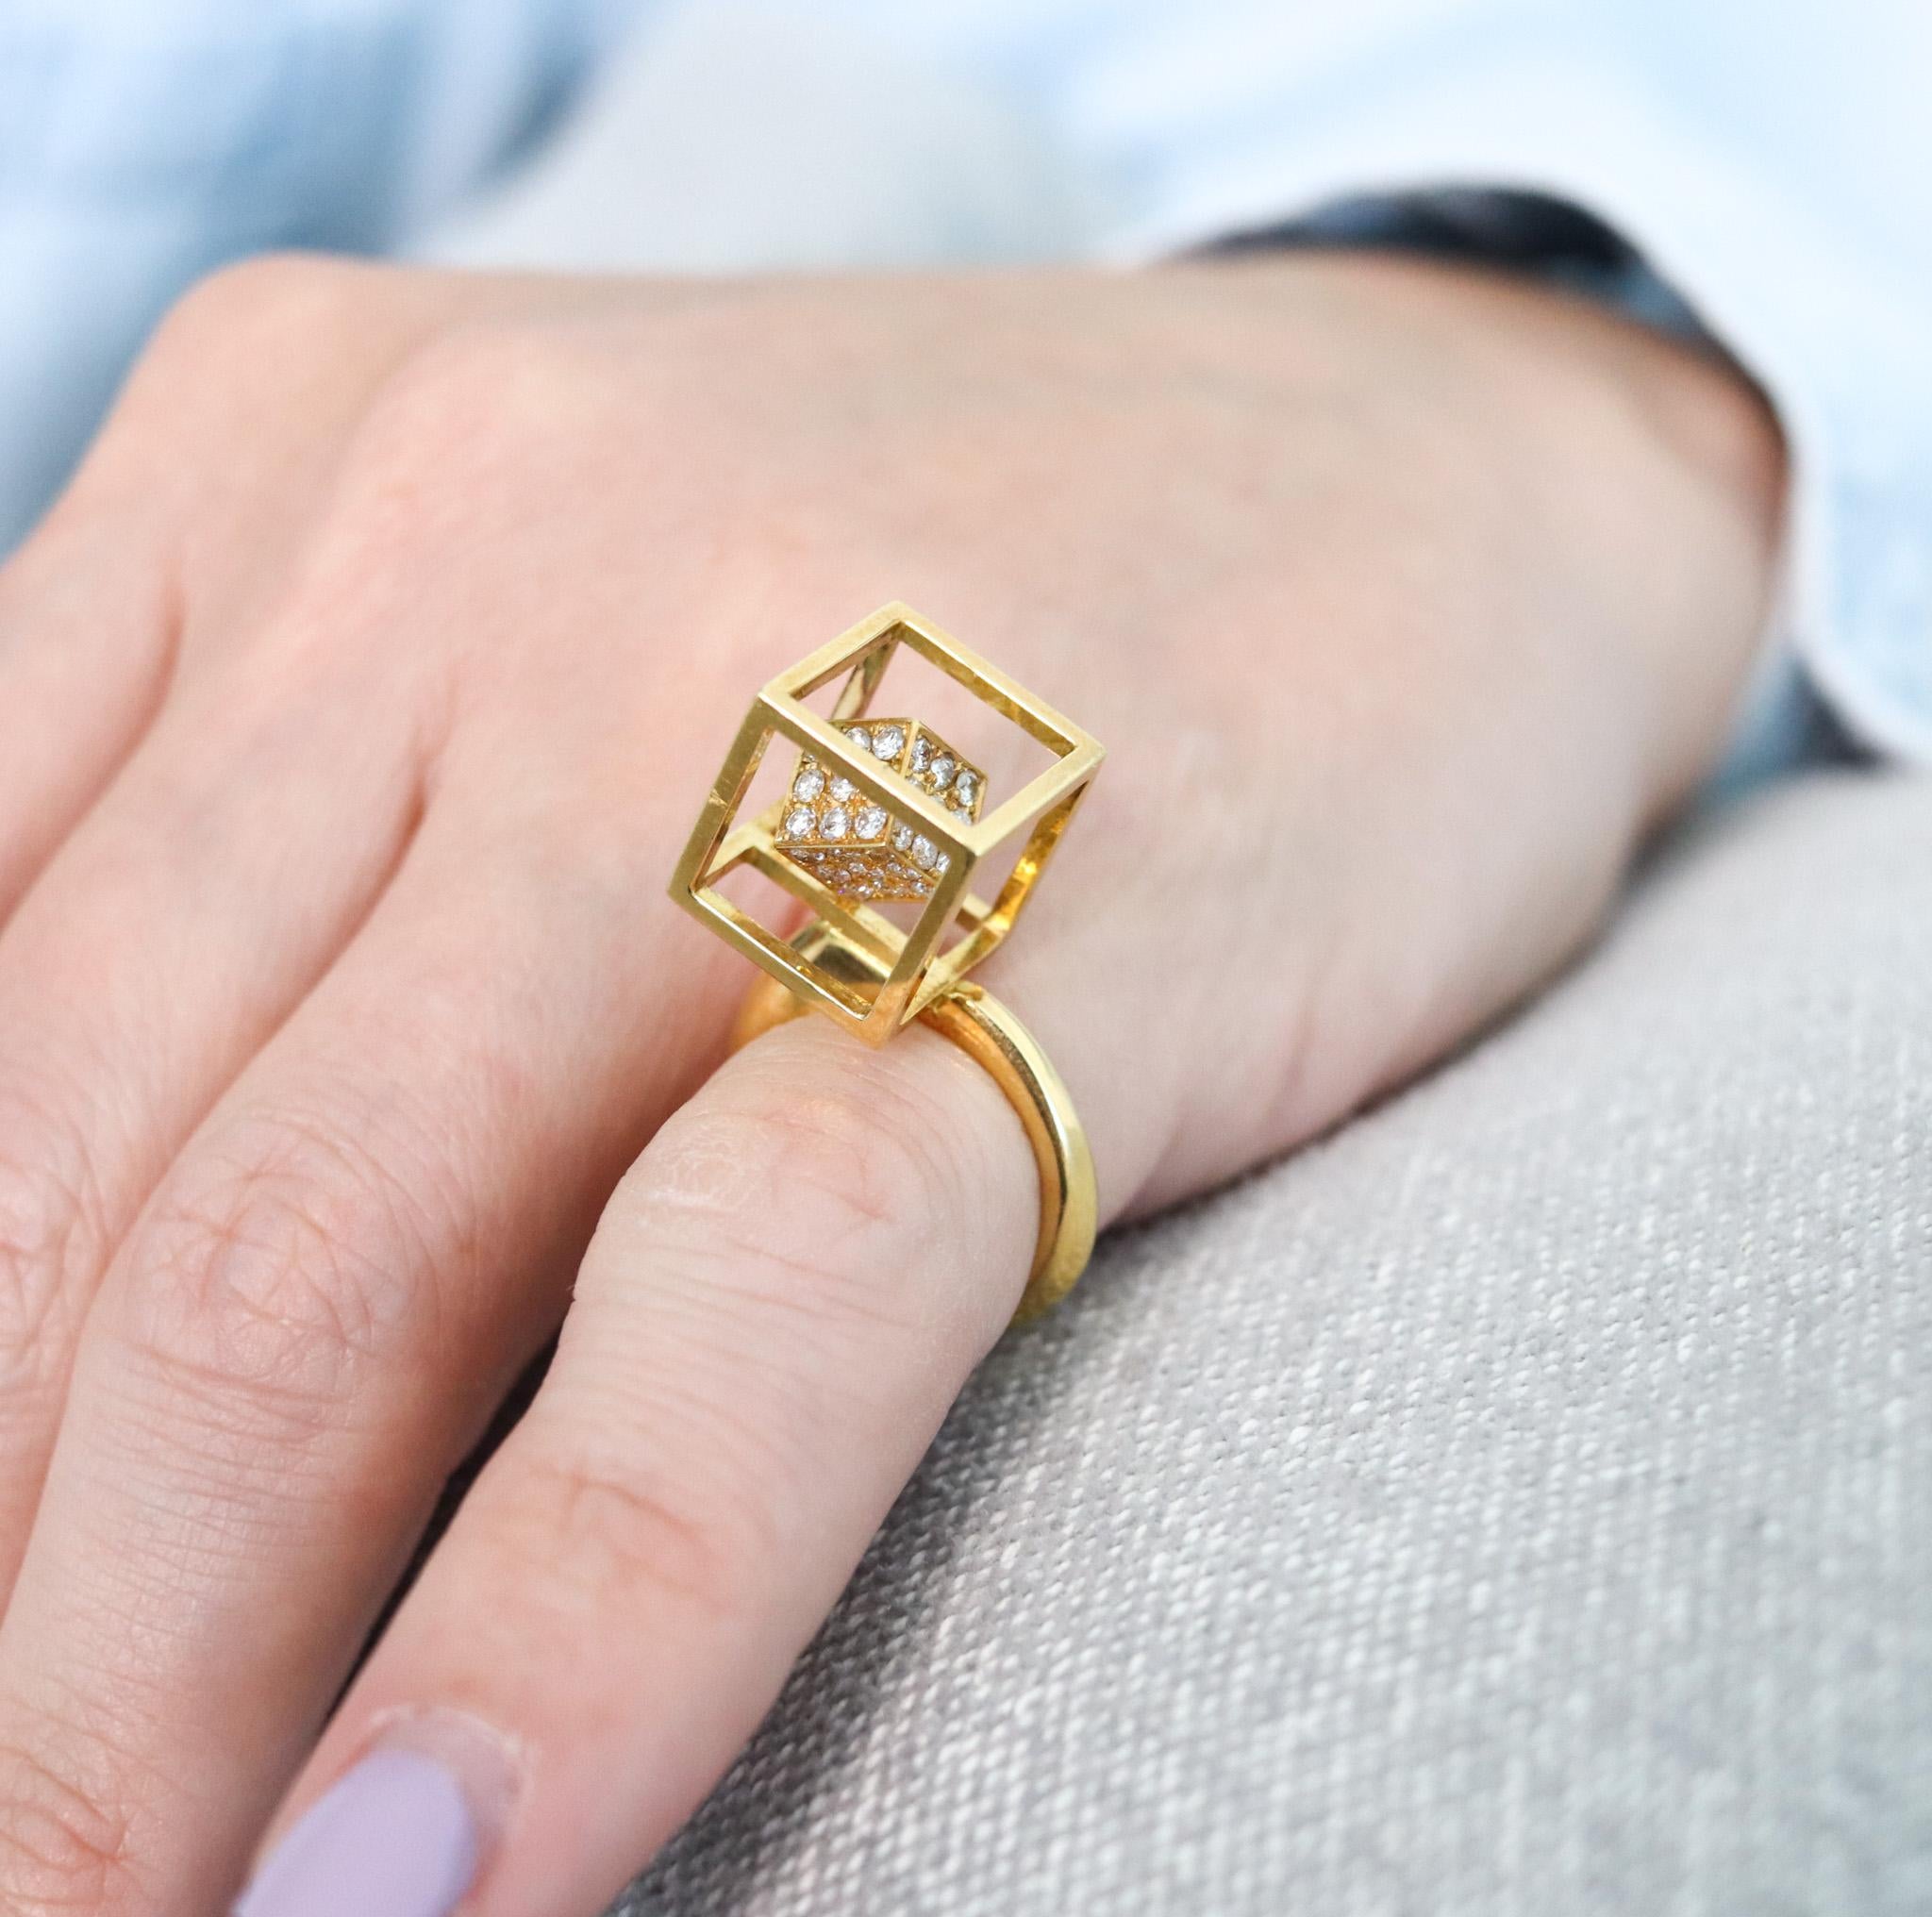 Modernist Sculptural Op Art Ring In 18Kt Yellow Gold With 1.20 Ctw In Diamonds For Sale 2